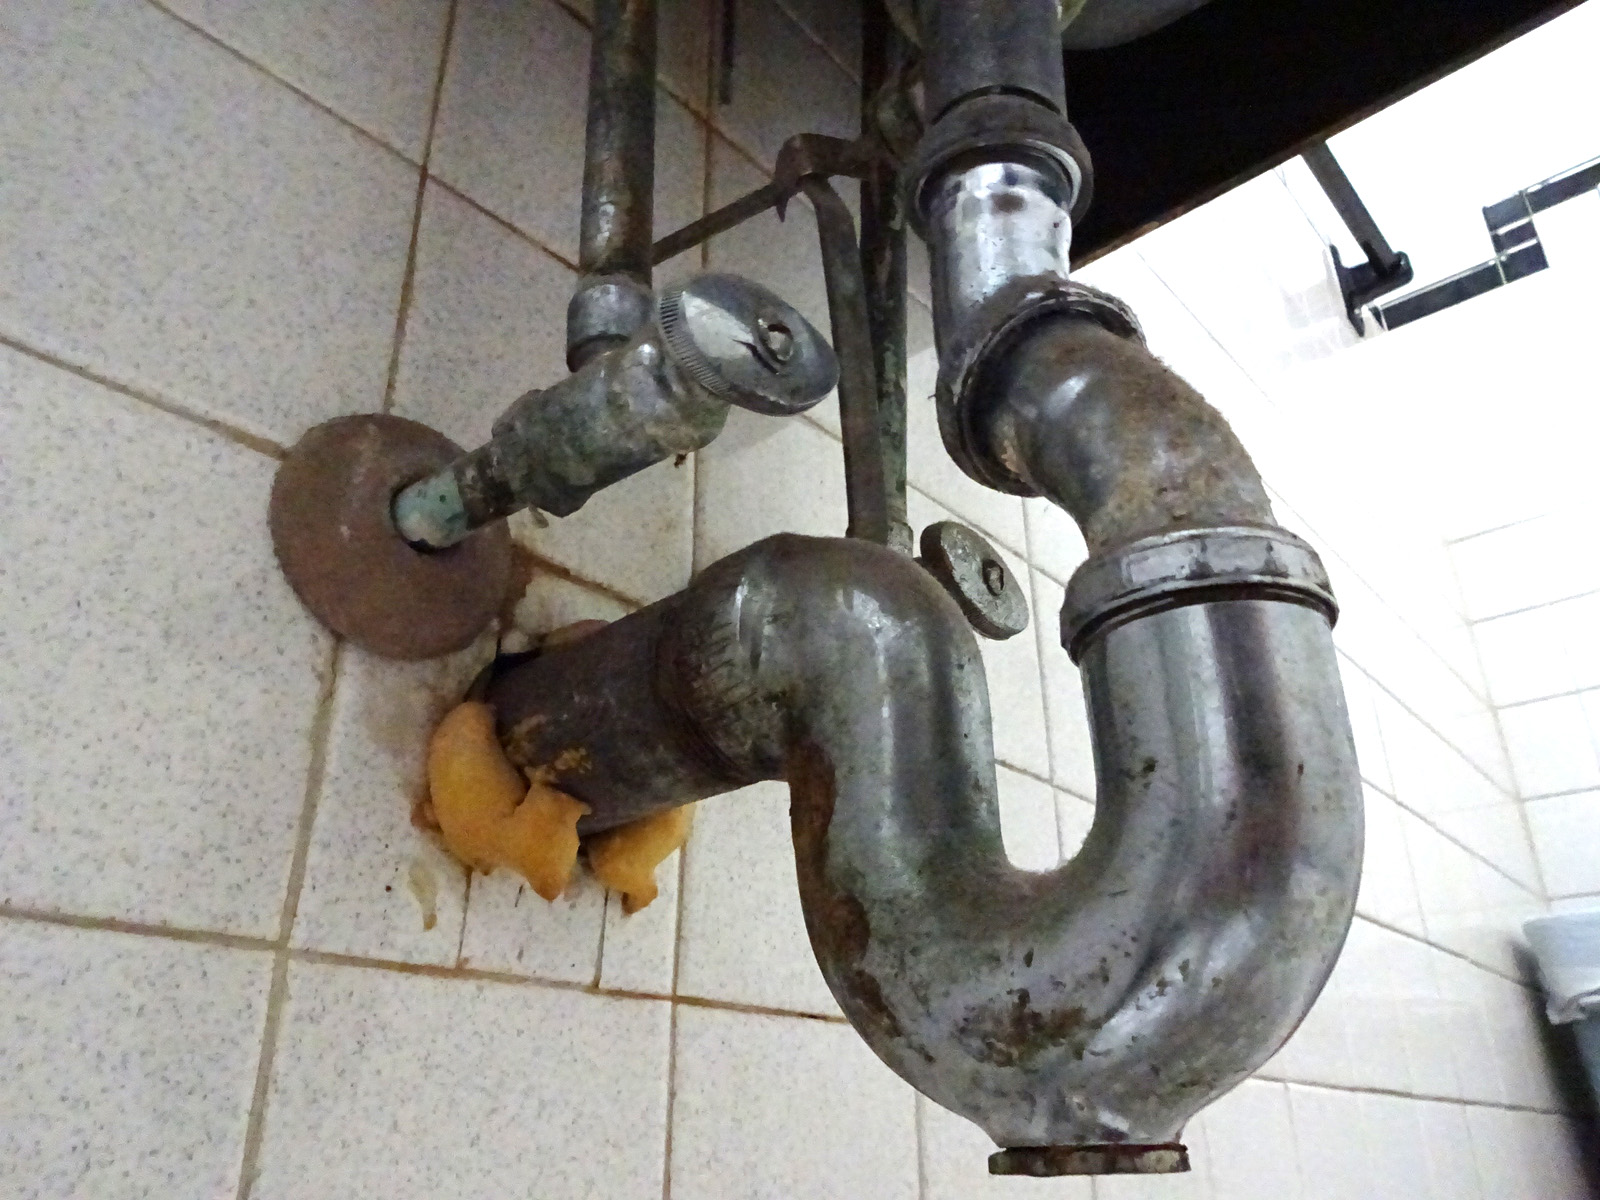 Pipe Cleaning Knowledge Base: Basic Facts